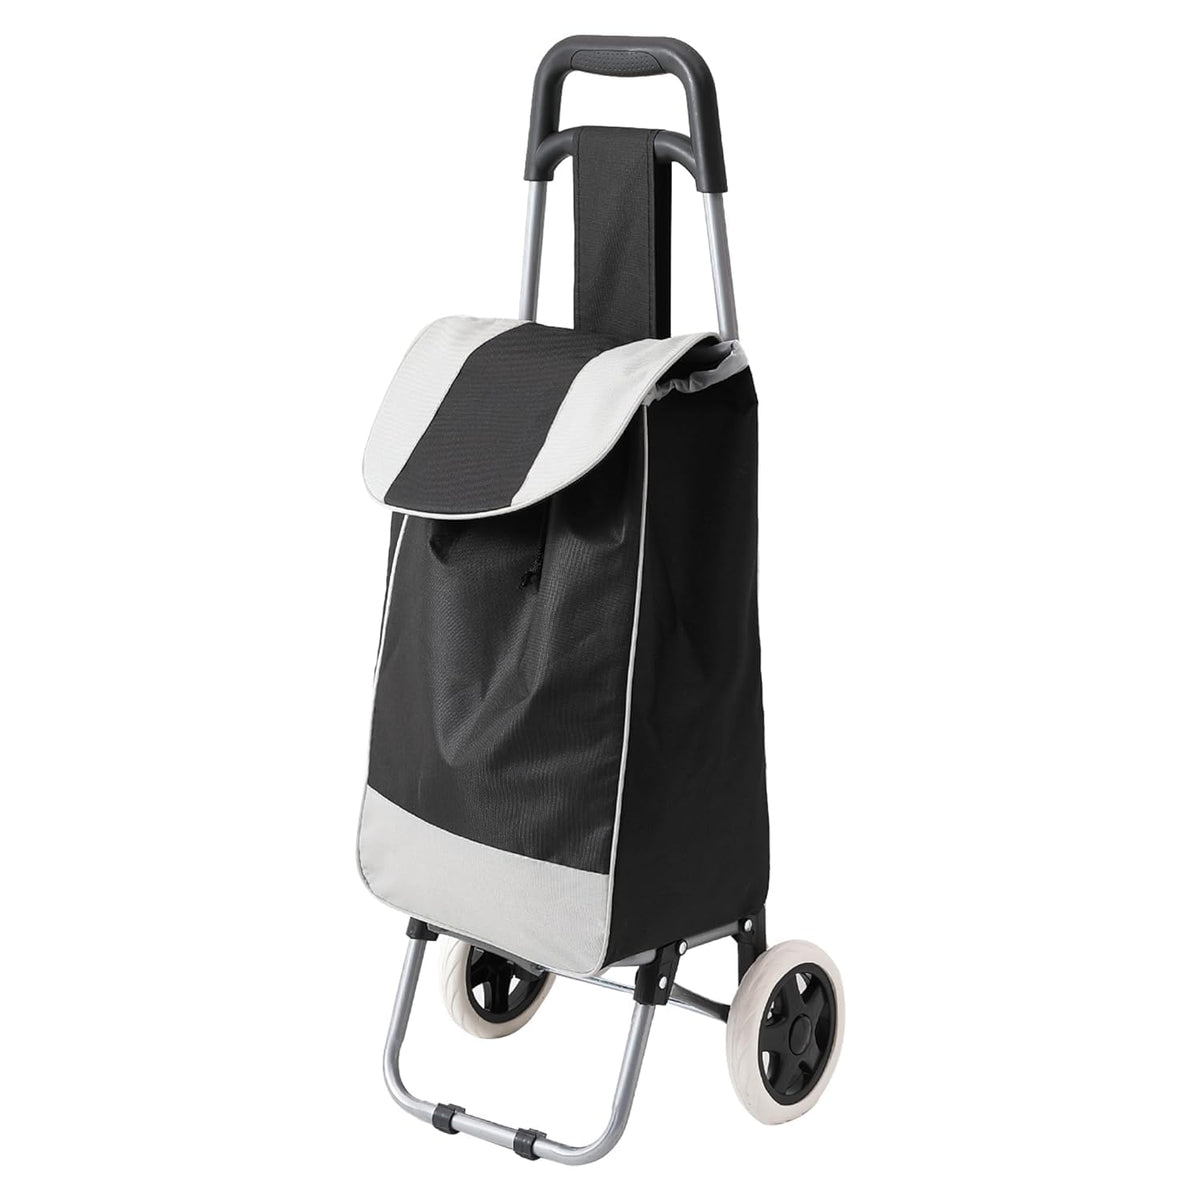 Cheston Shopping Bag for Grocery Foldable Shopping Trolly Bag with Wheels | Large & Lightweight Shopping Trolly Bag with 30 Kg Capacity | Water-Proof Fabric with Multiple Pockets (Black & White)